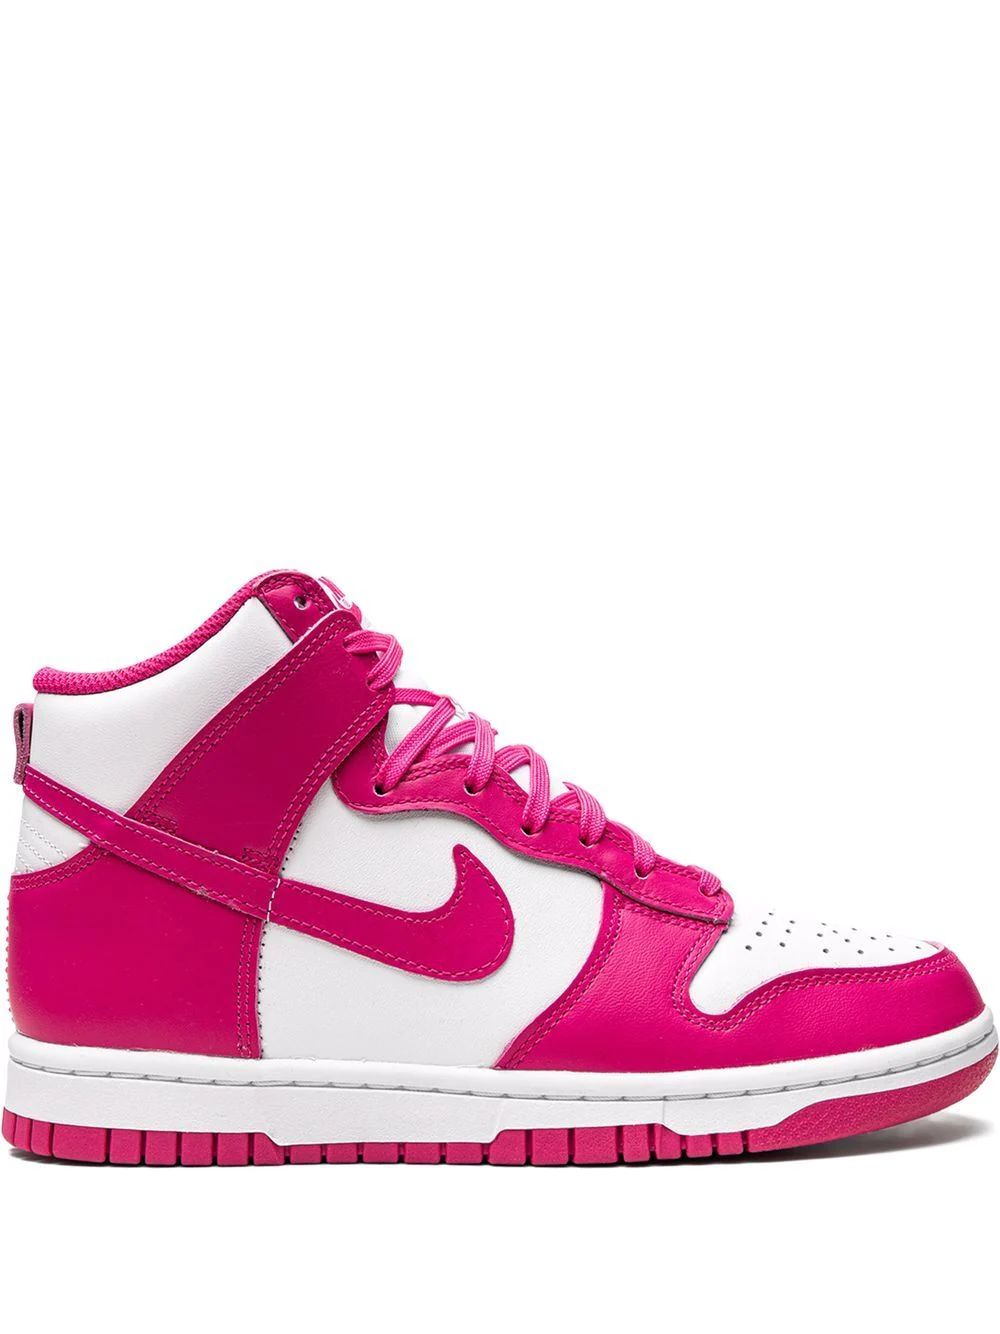 Dunk High "Pink Prime" sneakers | Farfetch Global